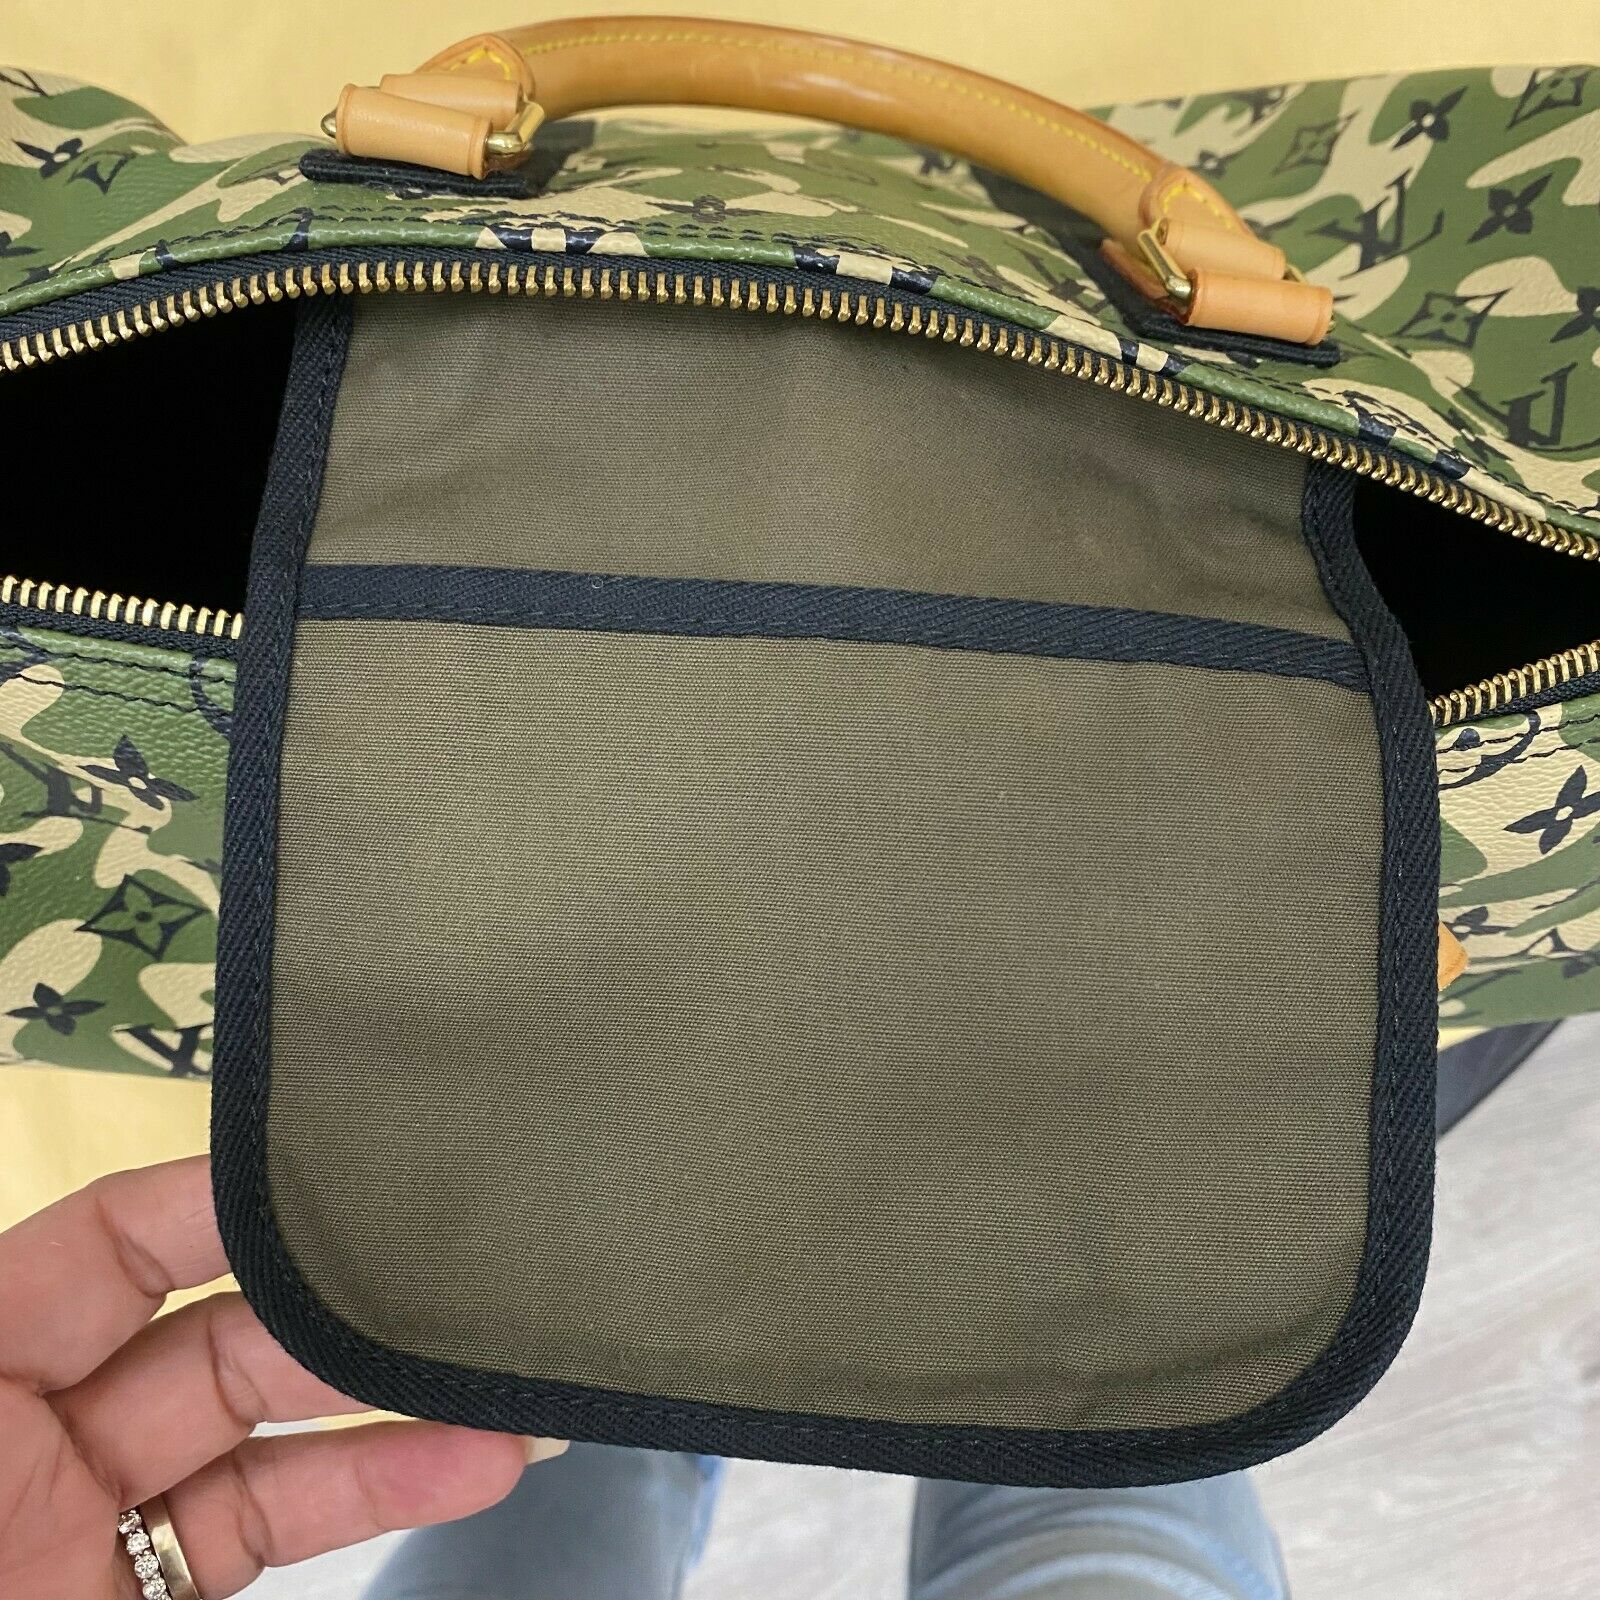 Fast & Professional Translation Service - LOUIS VUITTON Ltd Edition Speedy  35 M95773 Camouflage Bag With Receipt Item specifics    #100authentic #bag #camouflage #edition #louis  #louisvuitton #m95773 #receipt #speedy